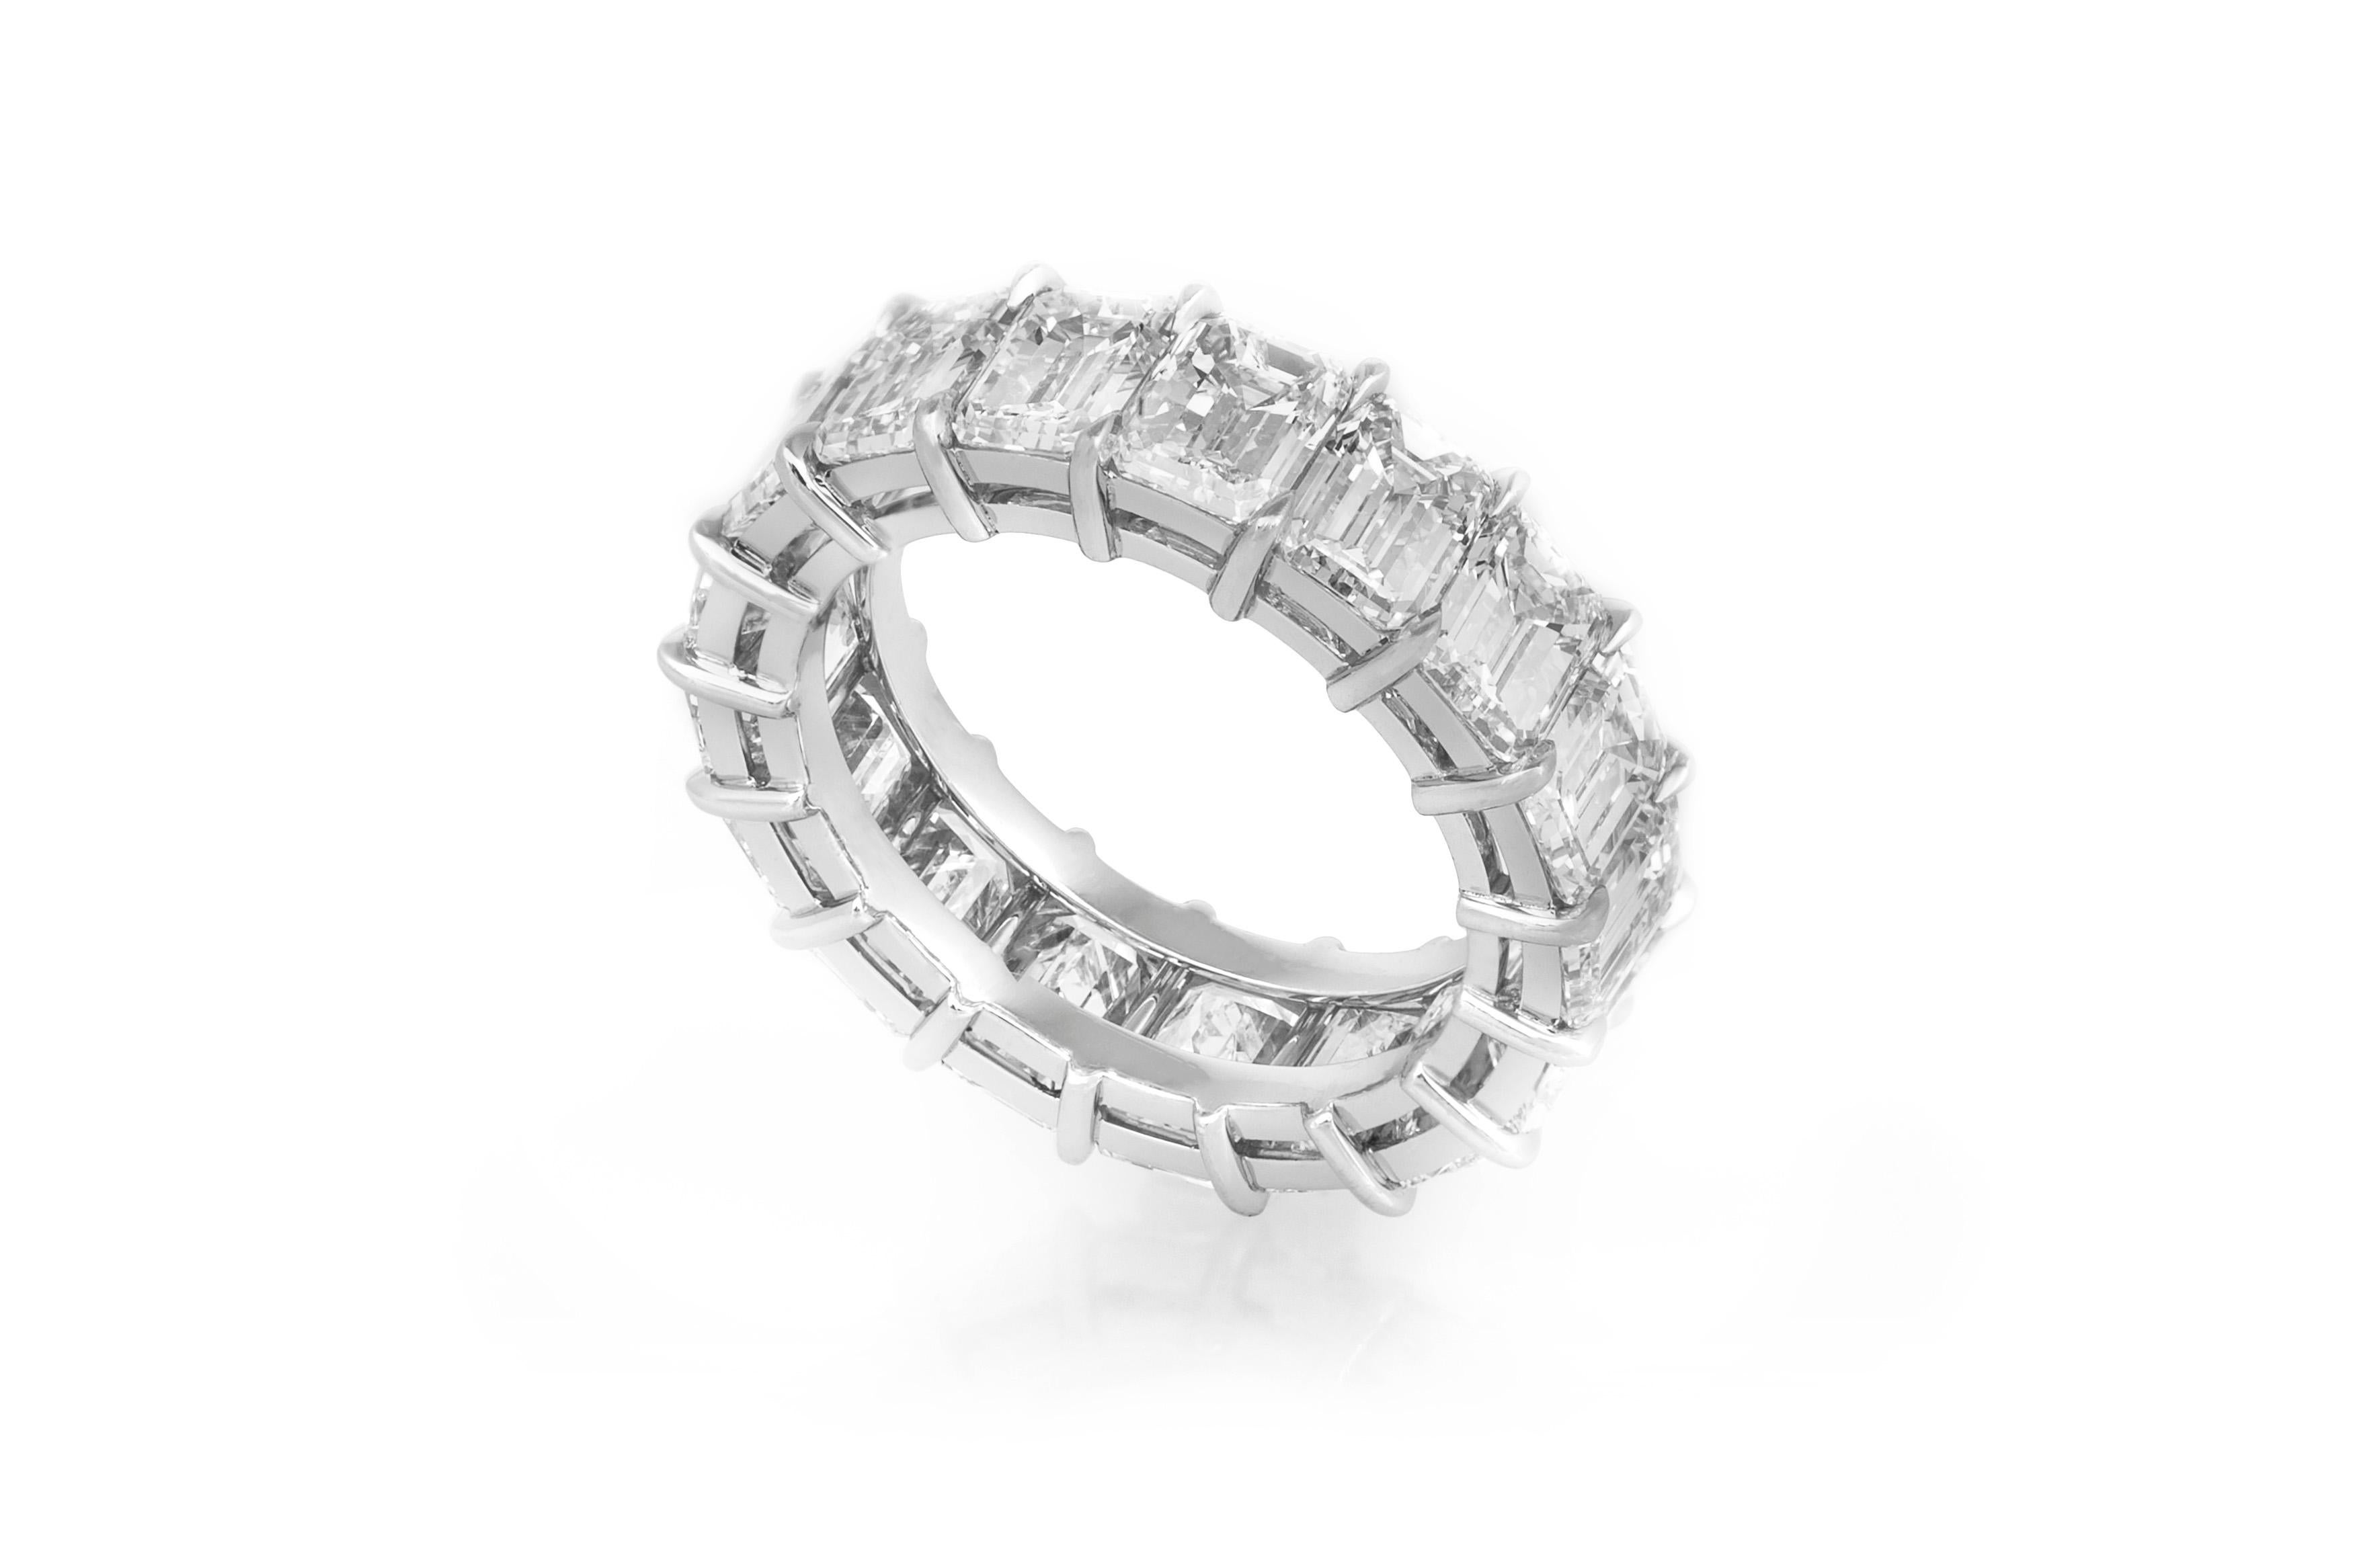 Estate Platinum Eternity Ring features 17 emerald cut diamonds, weighing a total of 9.06 carats. Ring Size 5.5. May be sized upon request. Additional charges may apply. Circa 1990's.